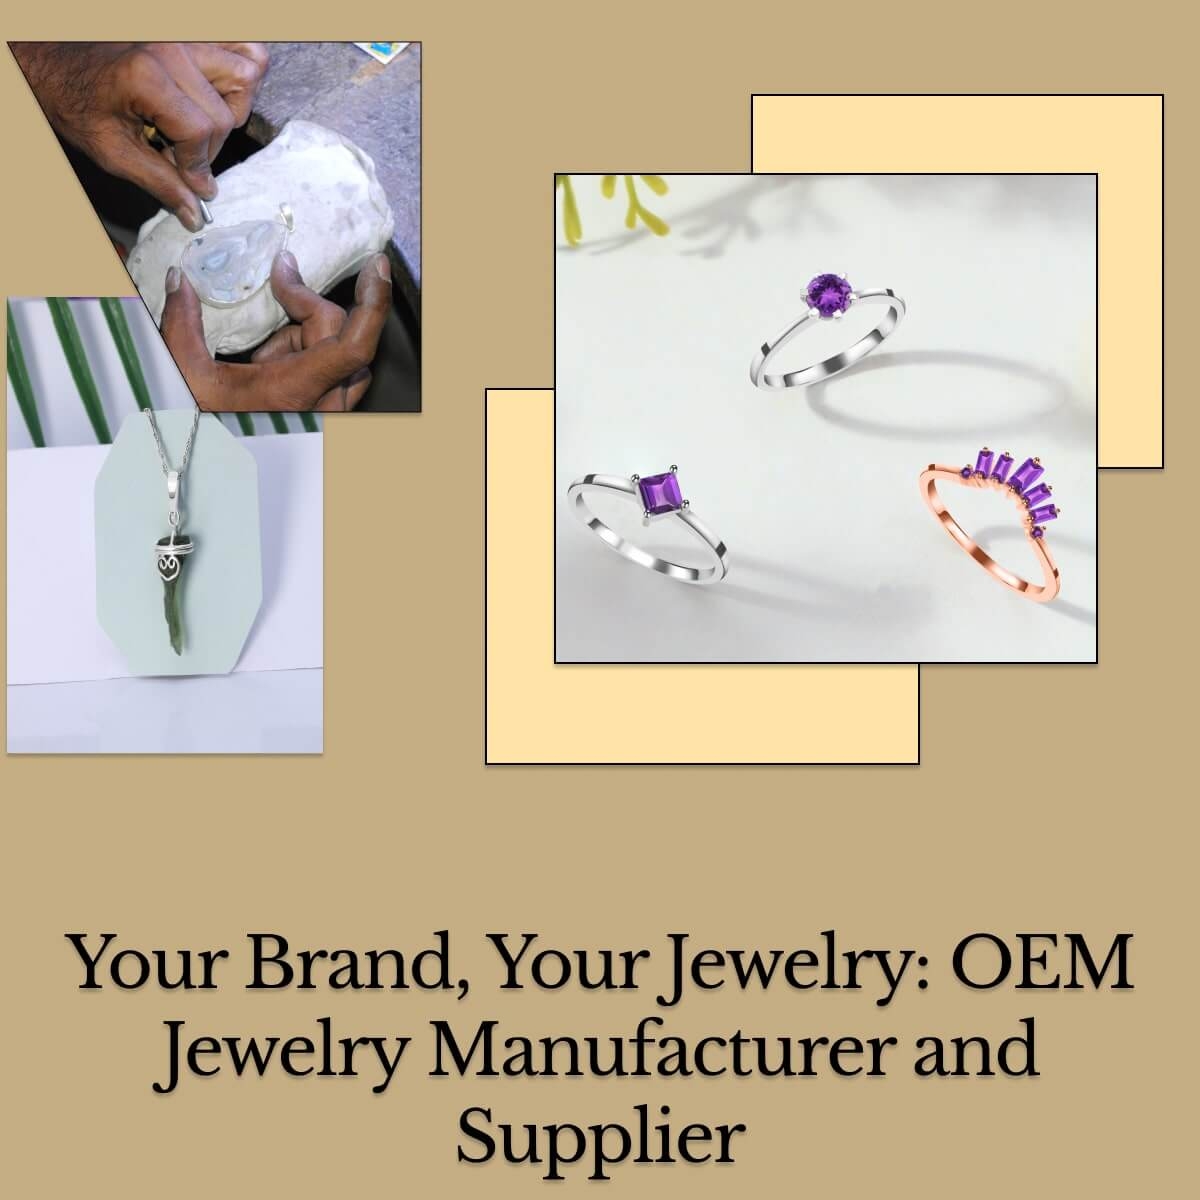 OEM Jewelry Manufacturer and Supplier